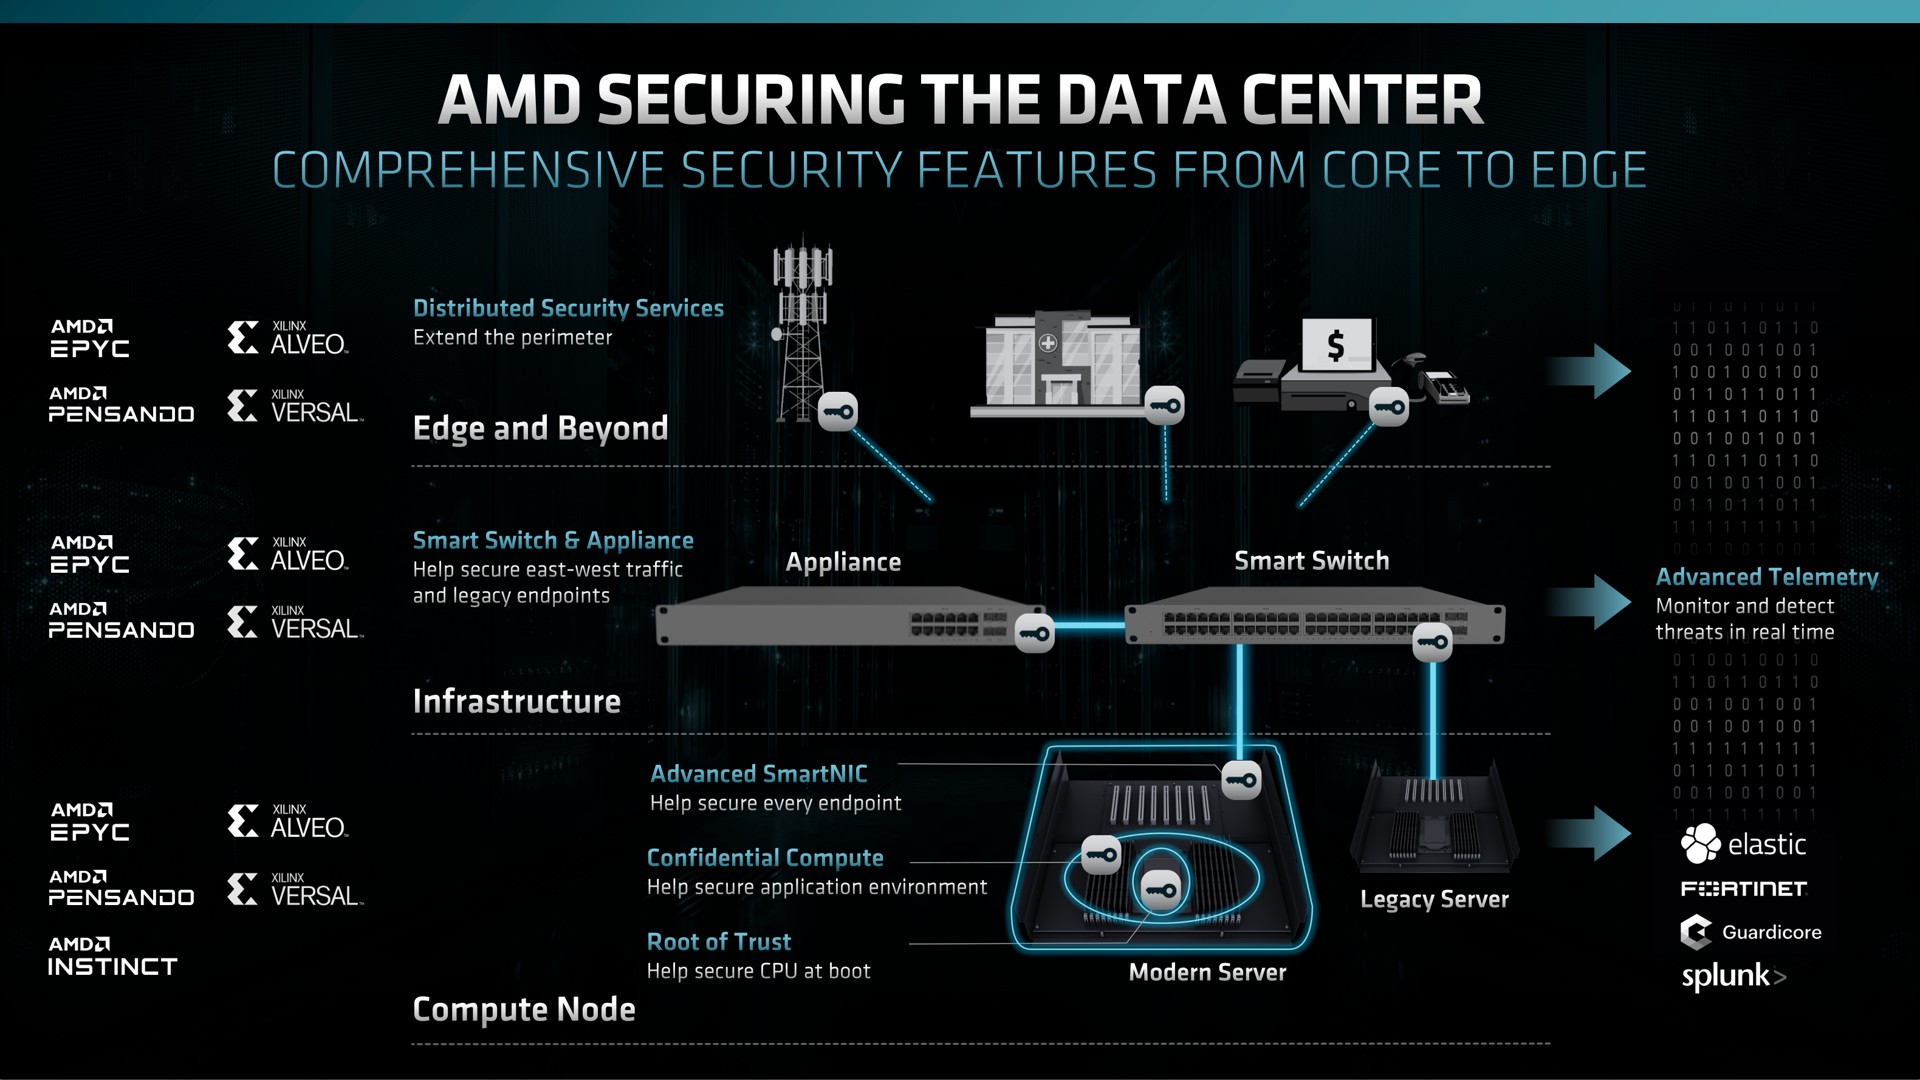 securing the data center comprehensive security features from core to edge | AMD